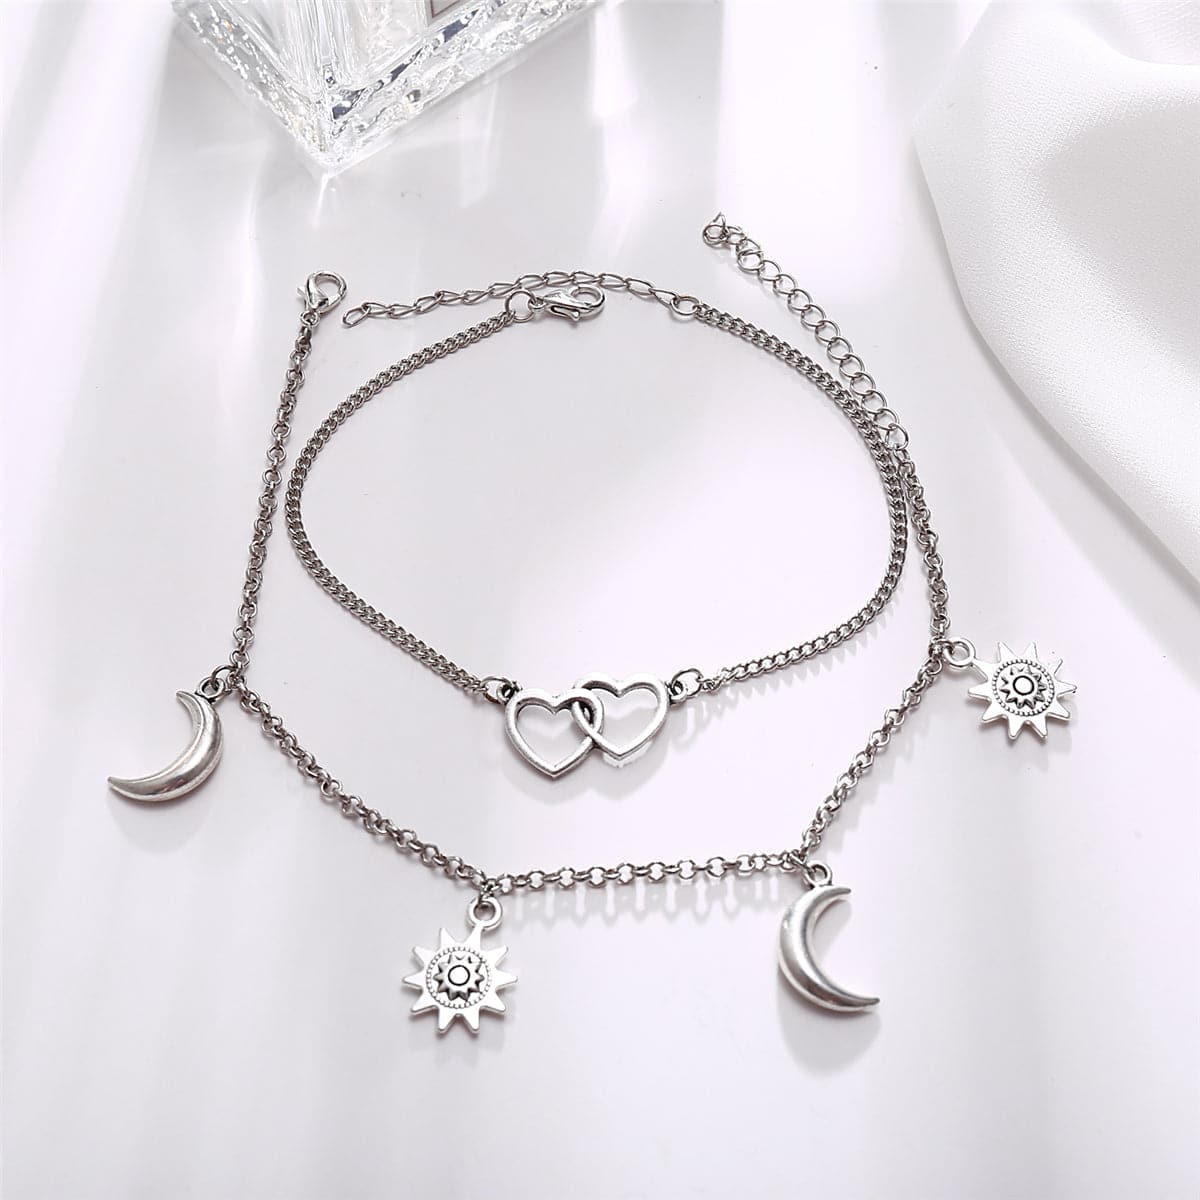 Silver-Plated Moon & Star Heart Charm Anklet Set